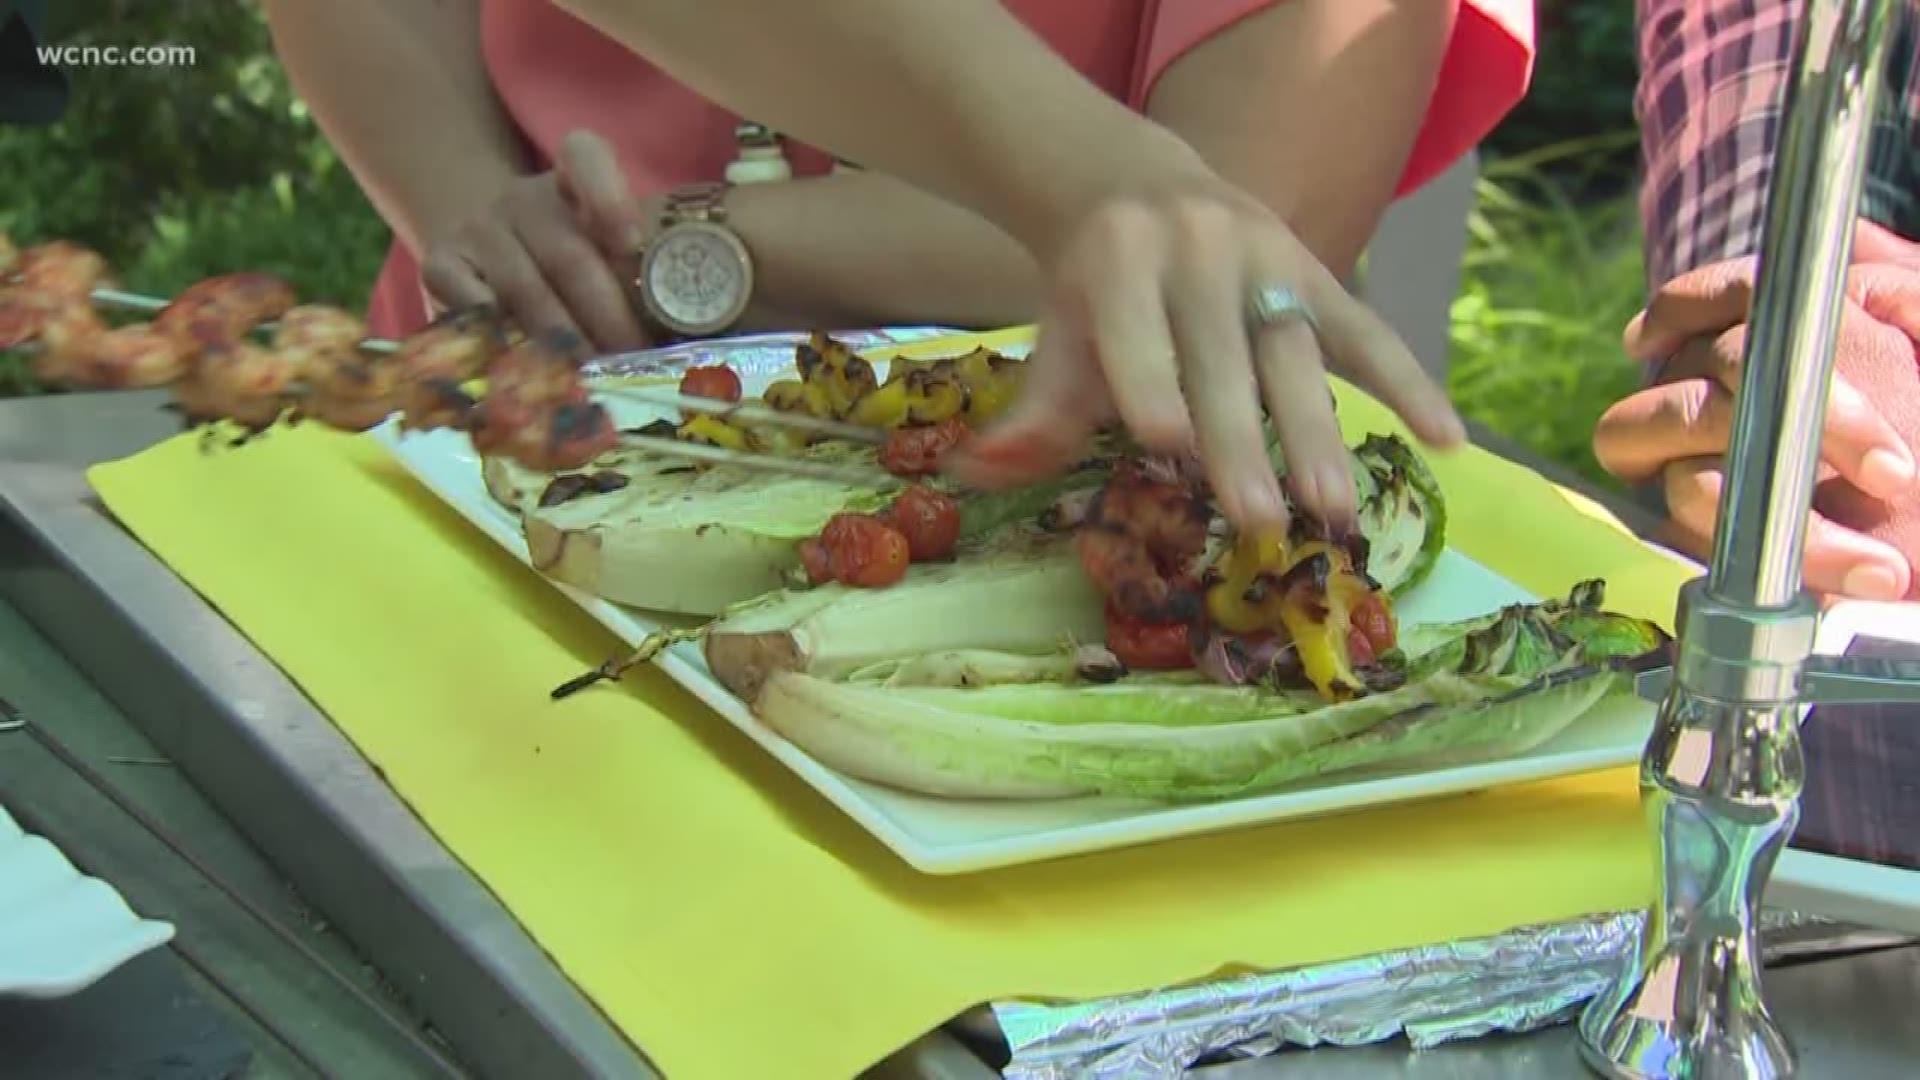 Health Coach, Samantha Eaton, fires up the grill to make a bright, flavorful salad that features fresh vegetables and shrimp.